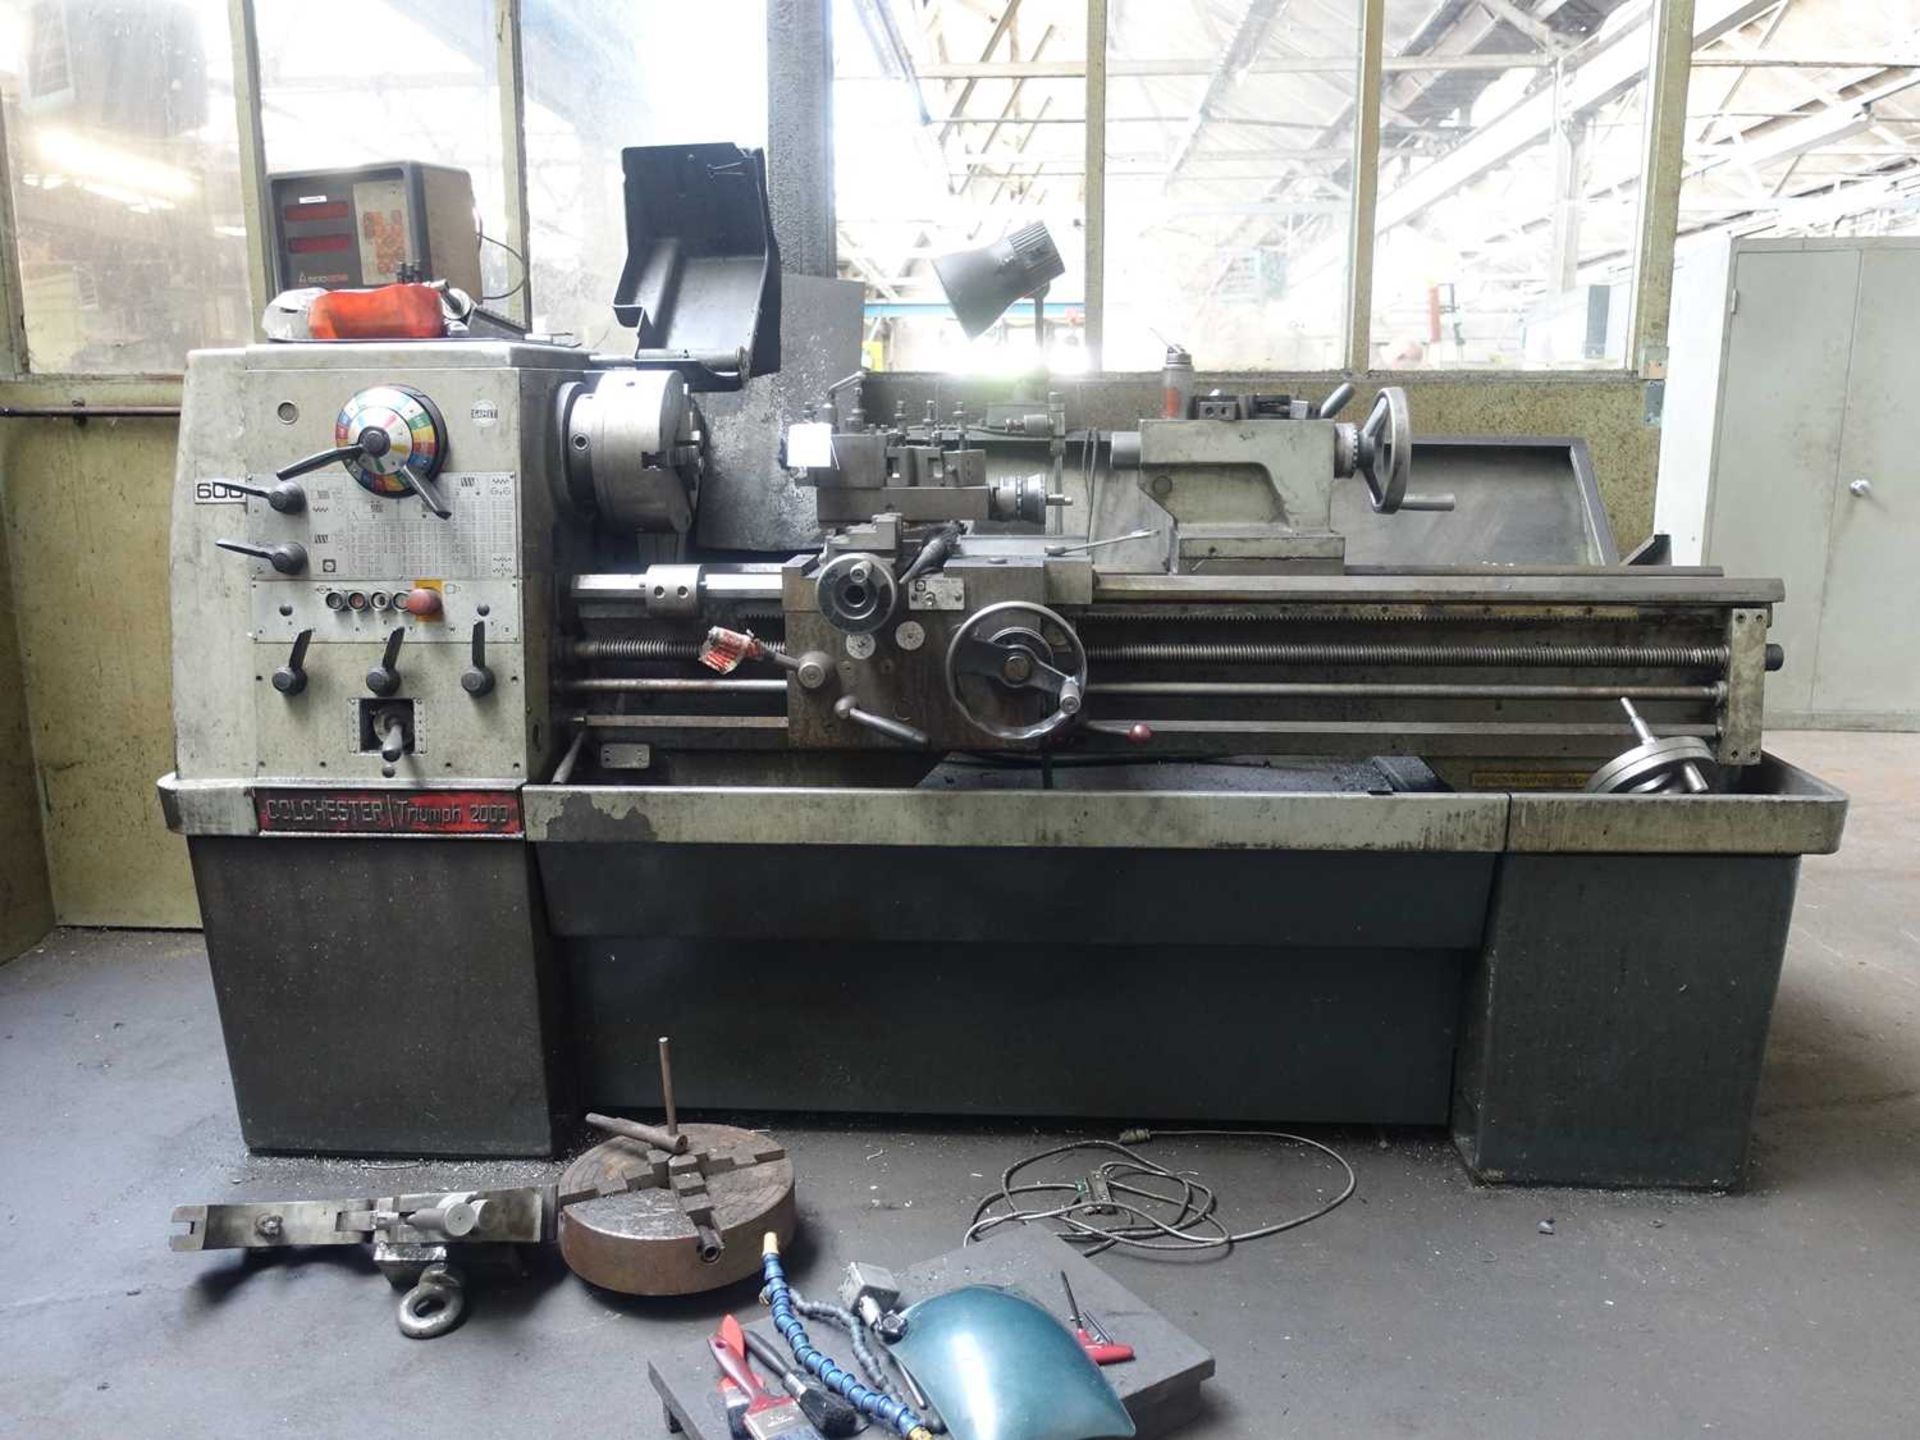 +VAT Colchester Triumph 2000 Gap Bed centre lathe with 3 and 4 jaw chuck, steady, and QC tool